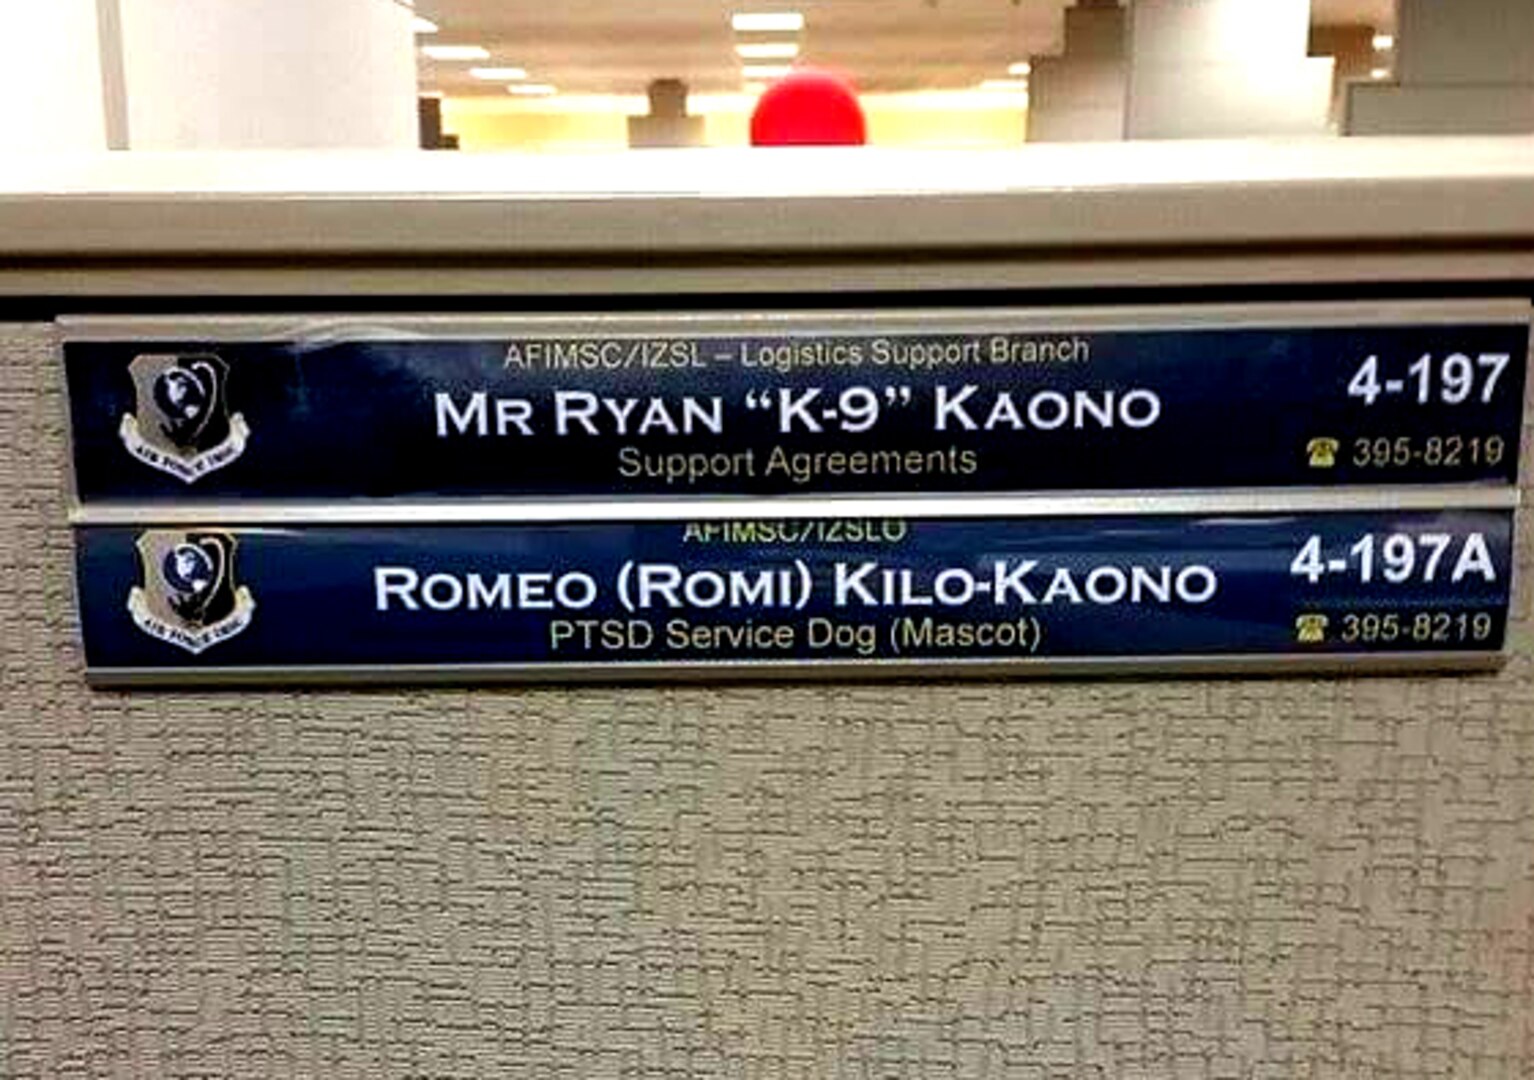 Ryan Kaono's work area at the Air Force Installation and Mission Support Center clearly shows his cube mate and service dog Romeo belongs there too.